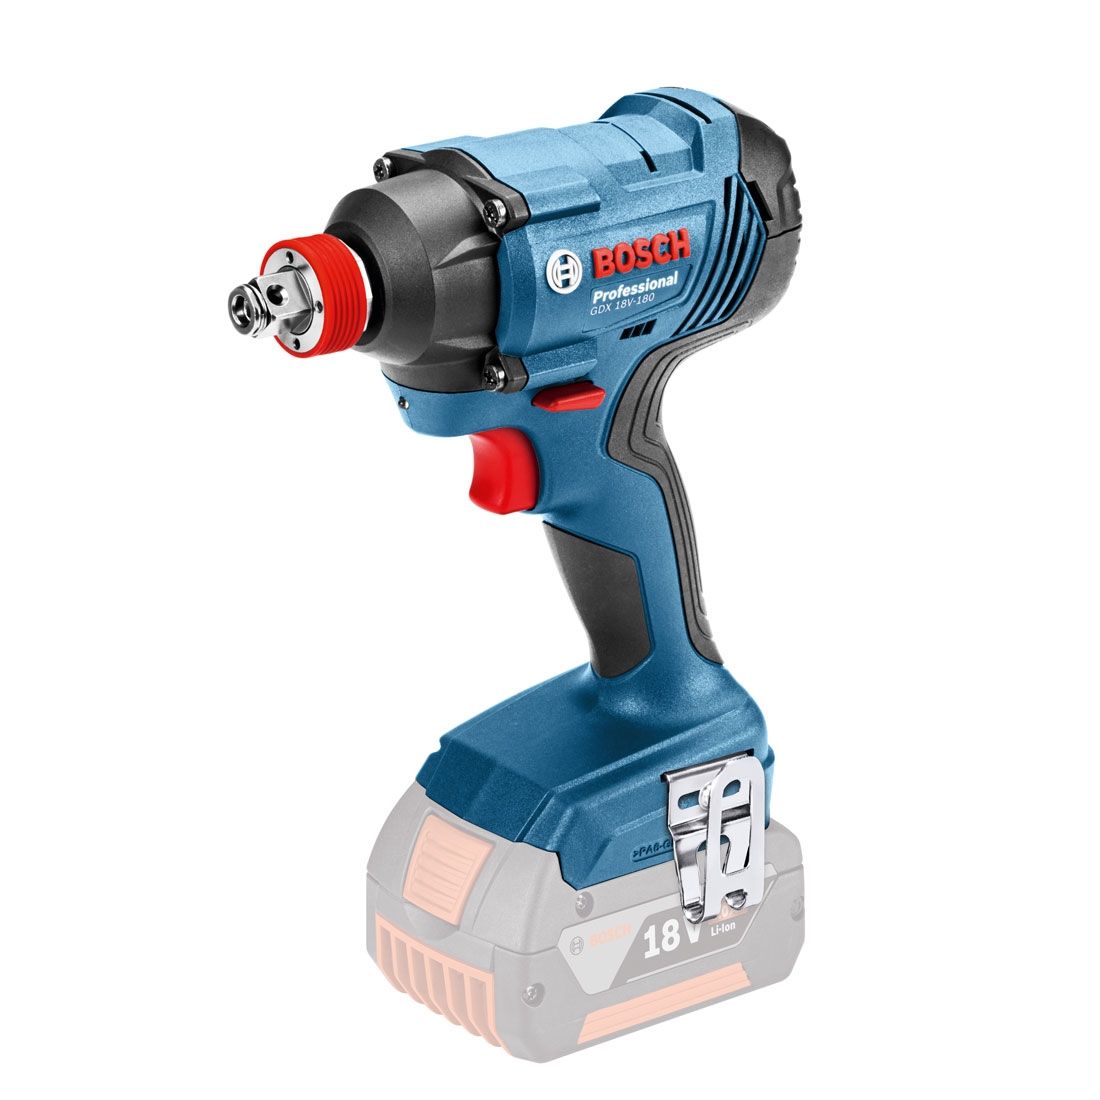 Bosch 18v Combi Impact Driver/Wrench, Special bit holder combines 1/2" square and 1/4" hexagon – for even more applications.